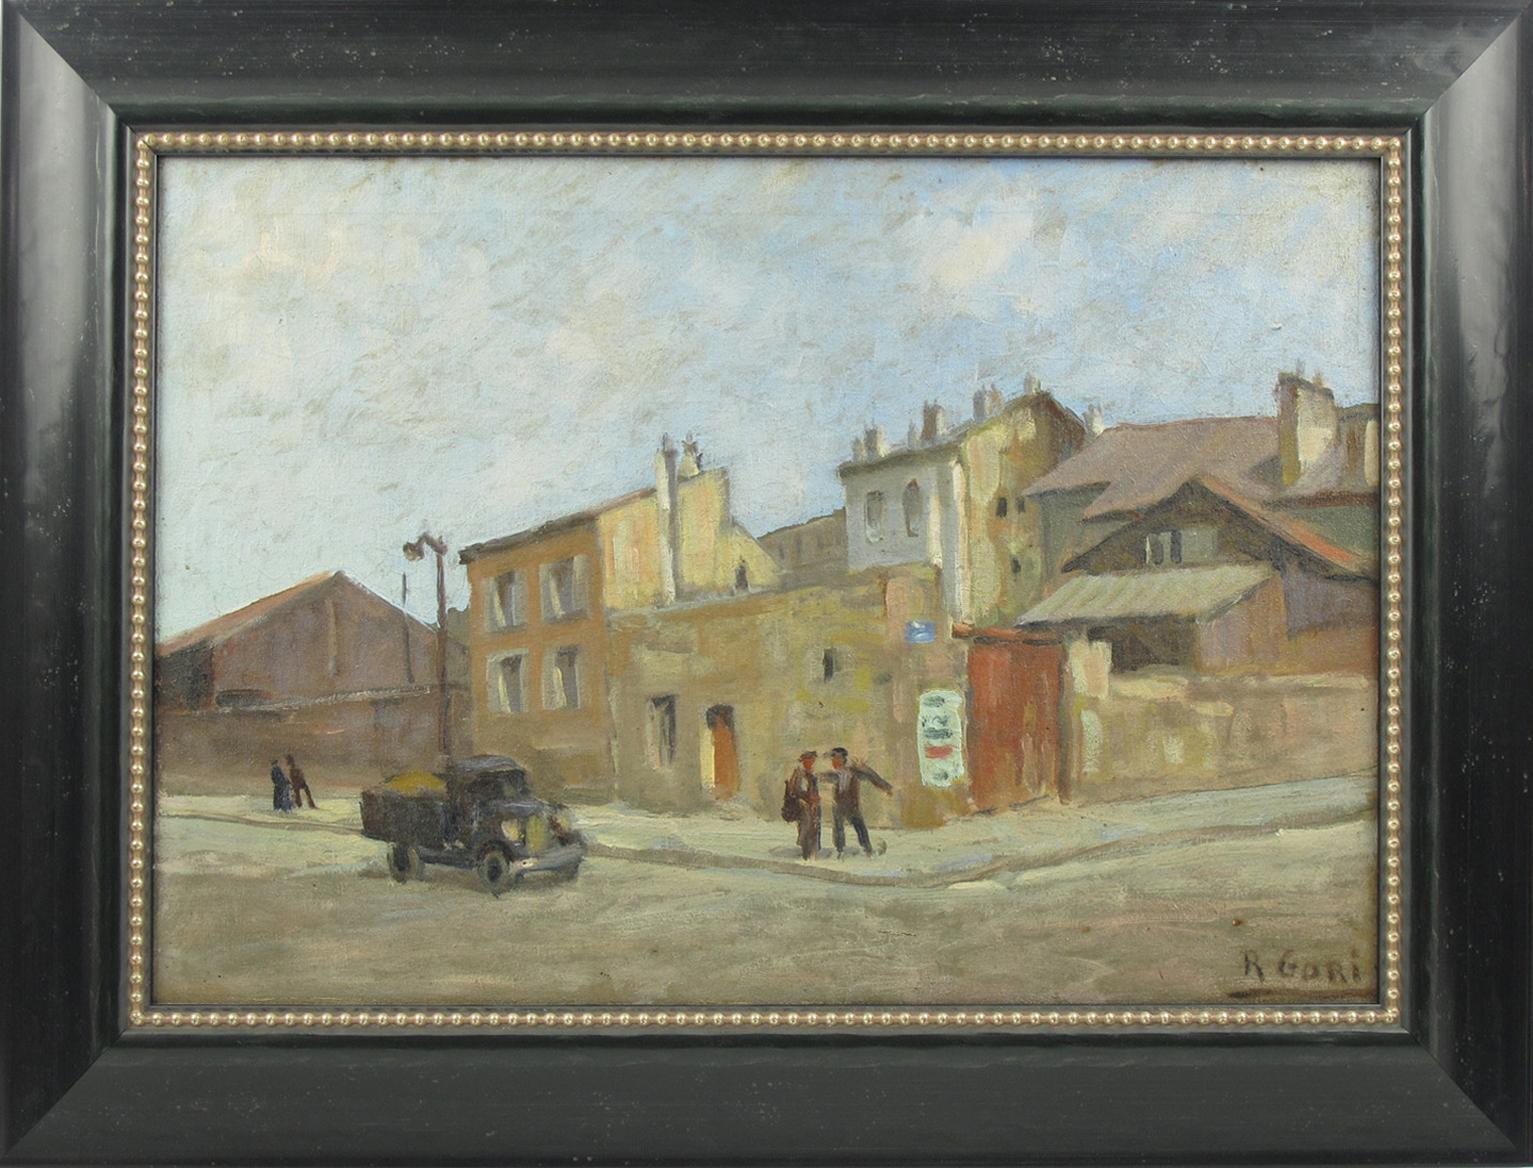 French Animated Street Scene Oil on Canvas Painting by Renzo Gori